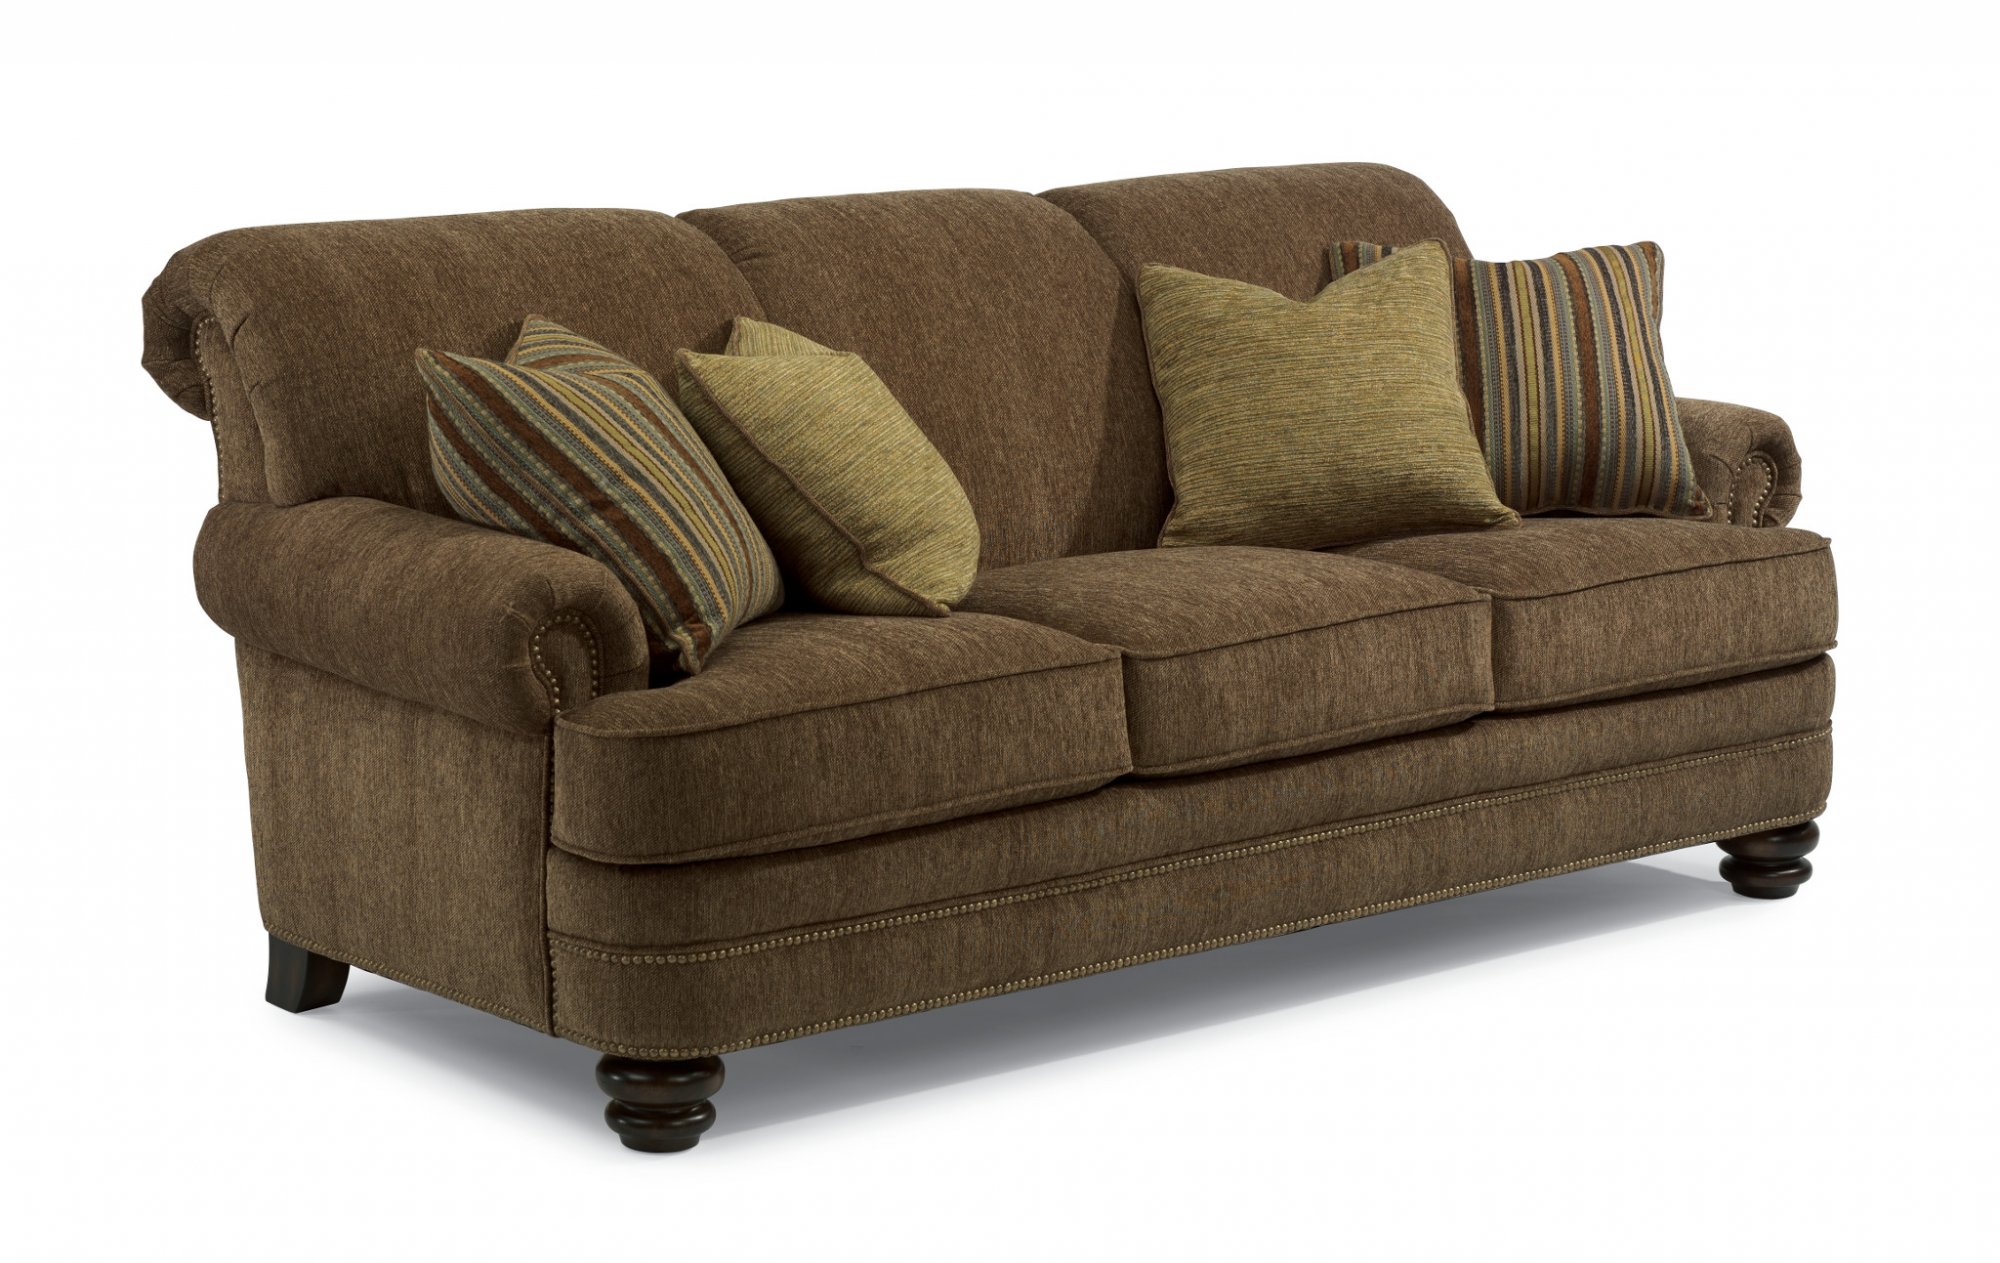 flexsteel sofa share via email download a high-resolution image KZZSGTP